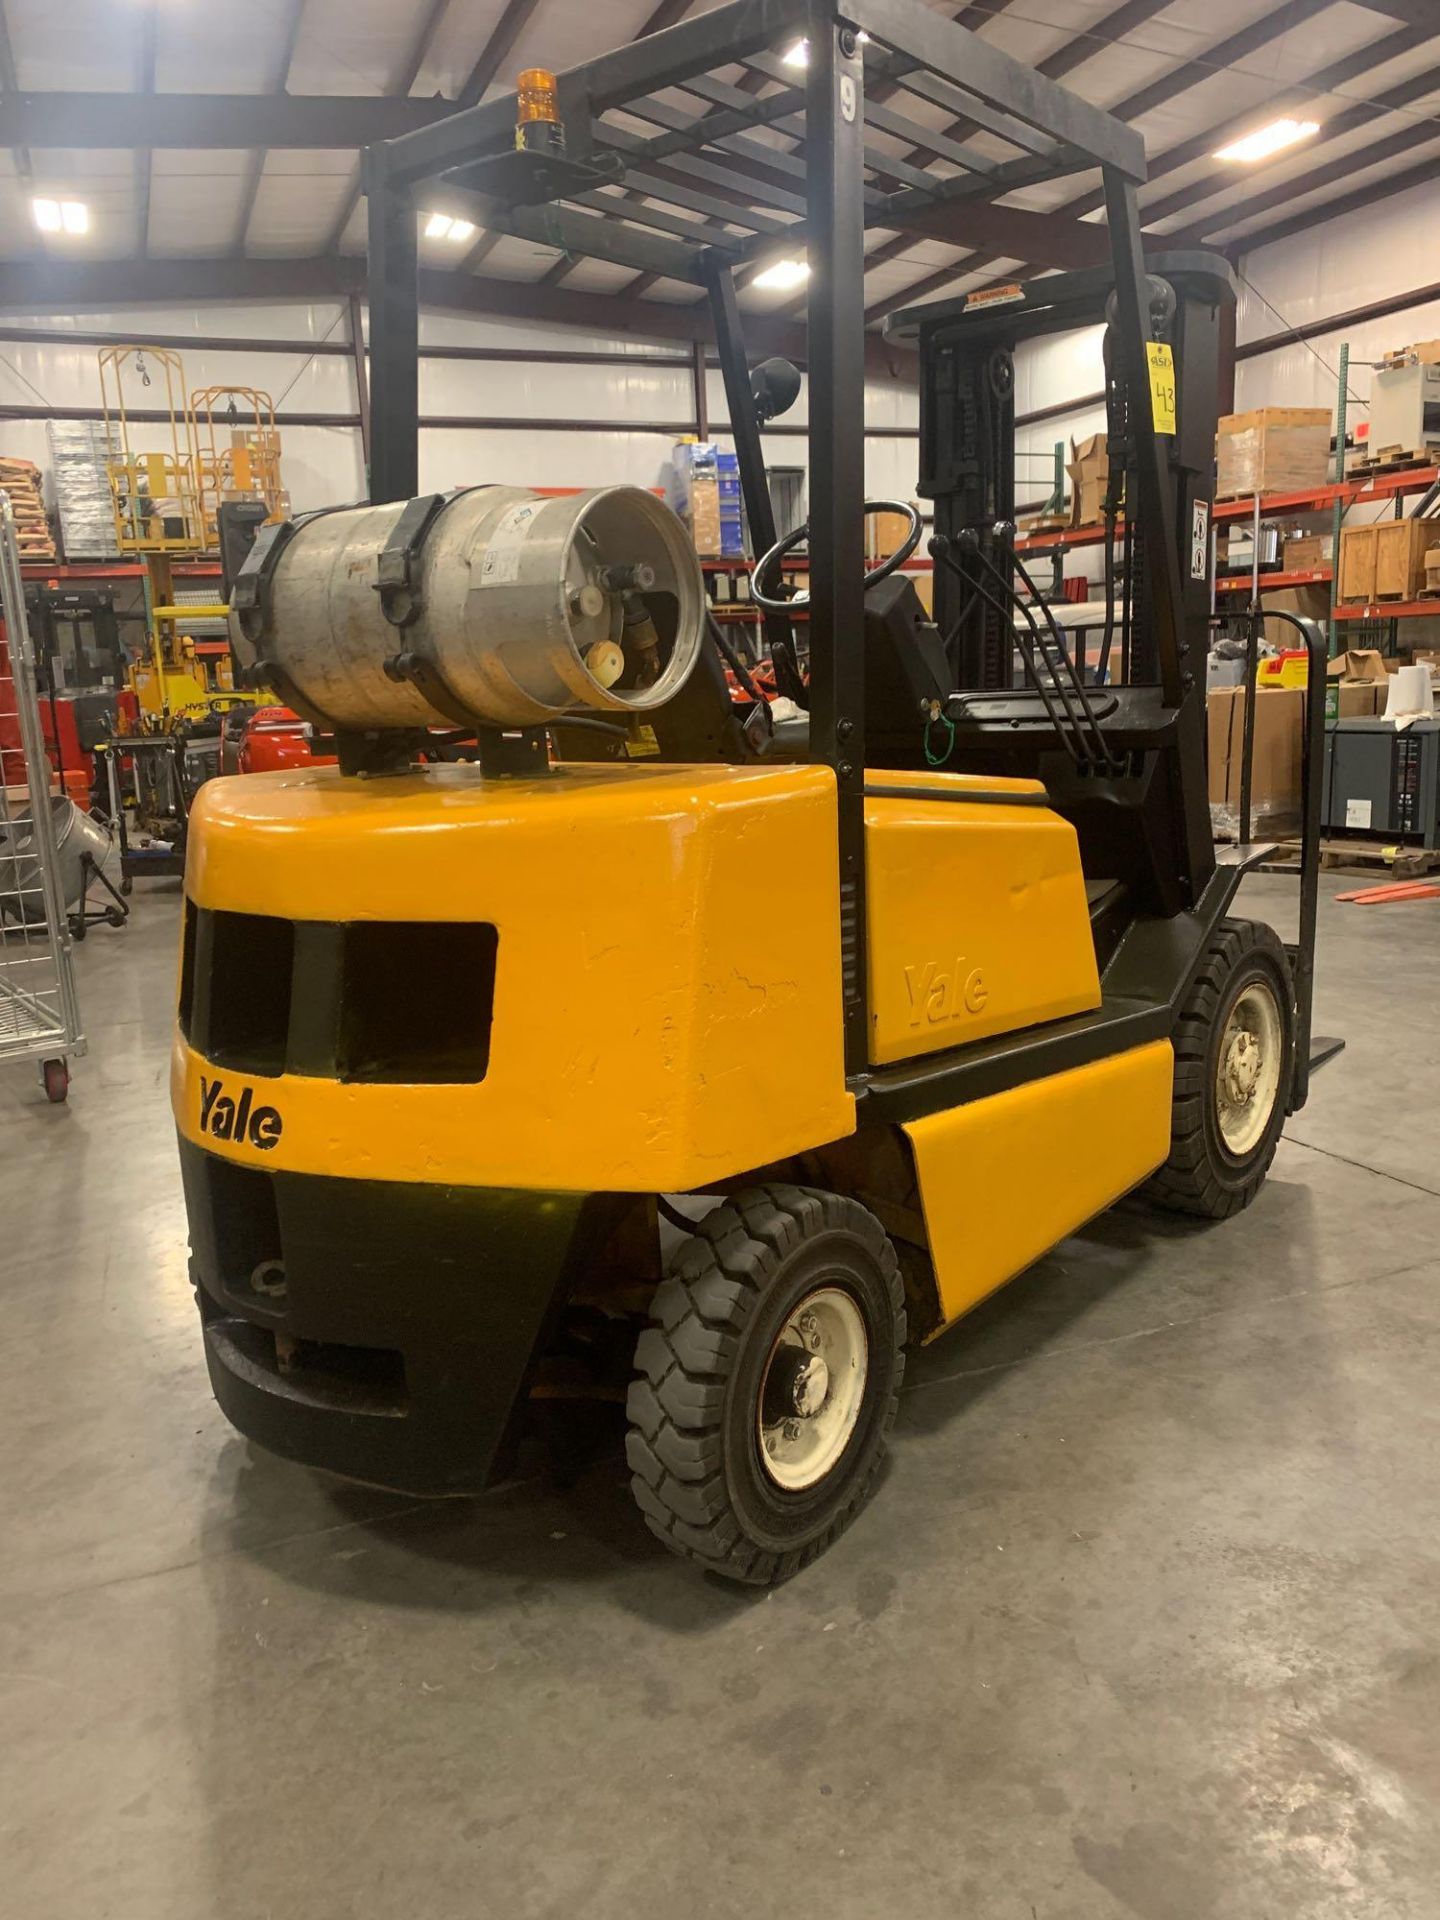 YALE GLP050 FORKLIFT, APPROXIMATELY 5,000LB CAPACITY, LP GAS,TILT, RUNS AND OPERATES - Image 4 of 7